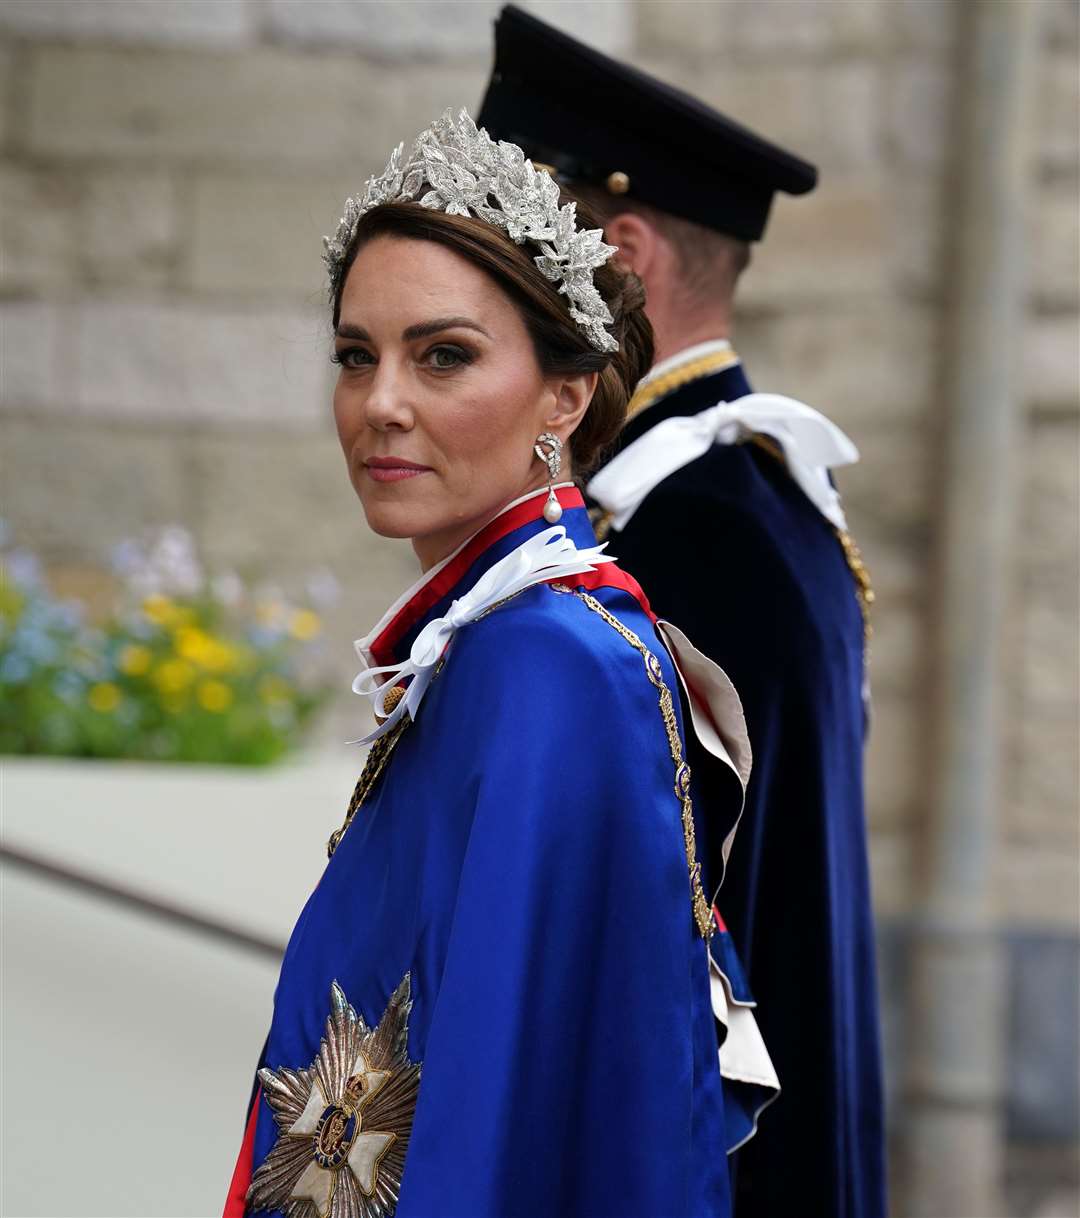 The Princess of Wales arriving at Westminster Abbey (Andrew Milligan/PA)